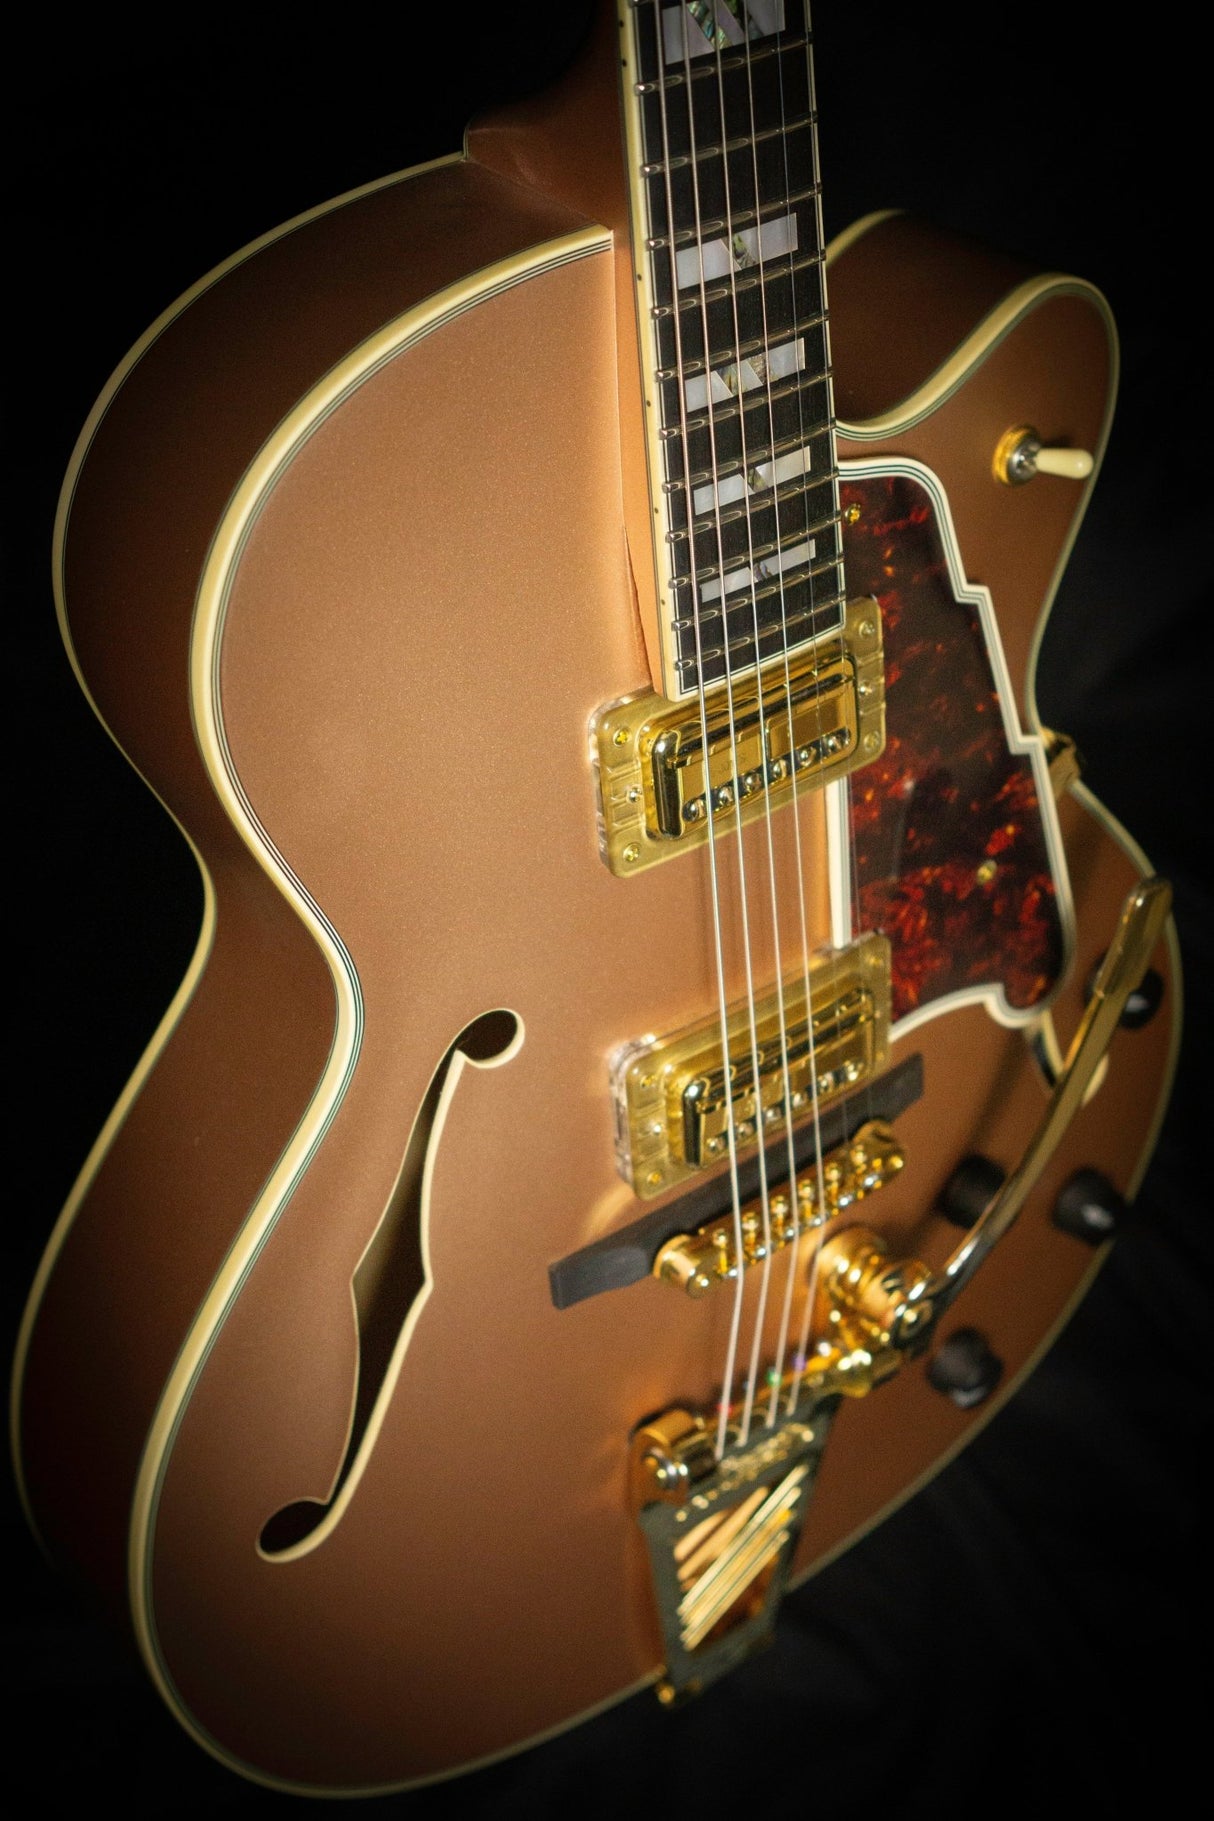 D'Angelico Deluxe 175 Matt Gold #32/50 (Pre-Owned) - Semi-Hollow - D'Angelico